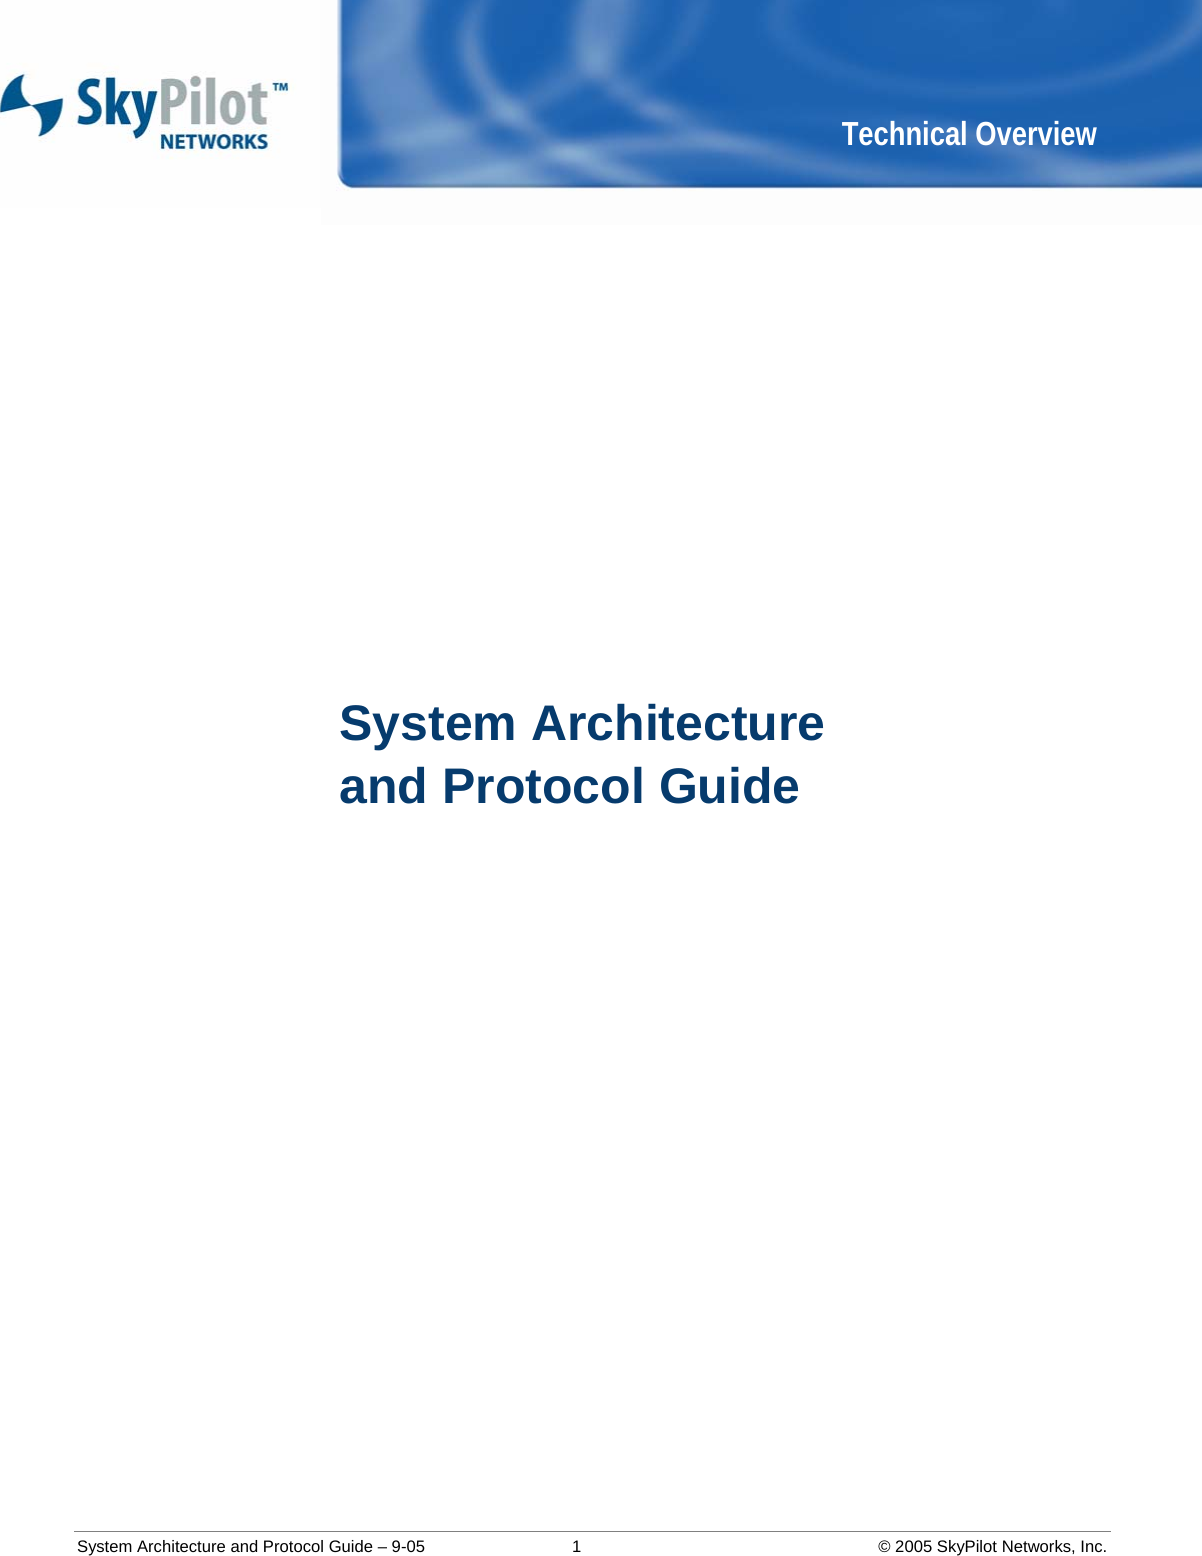  System Architecture and Protocol Guide – 9-05  1  © 2005 SkyPilot Networks, Inc. Technical Overview      System Architecture  and Protocol Guide              